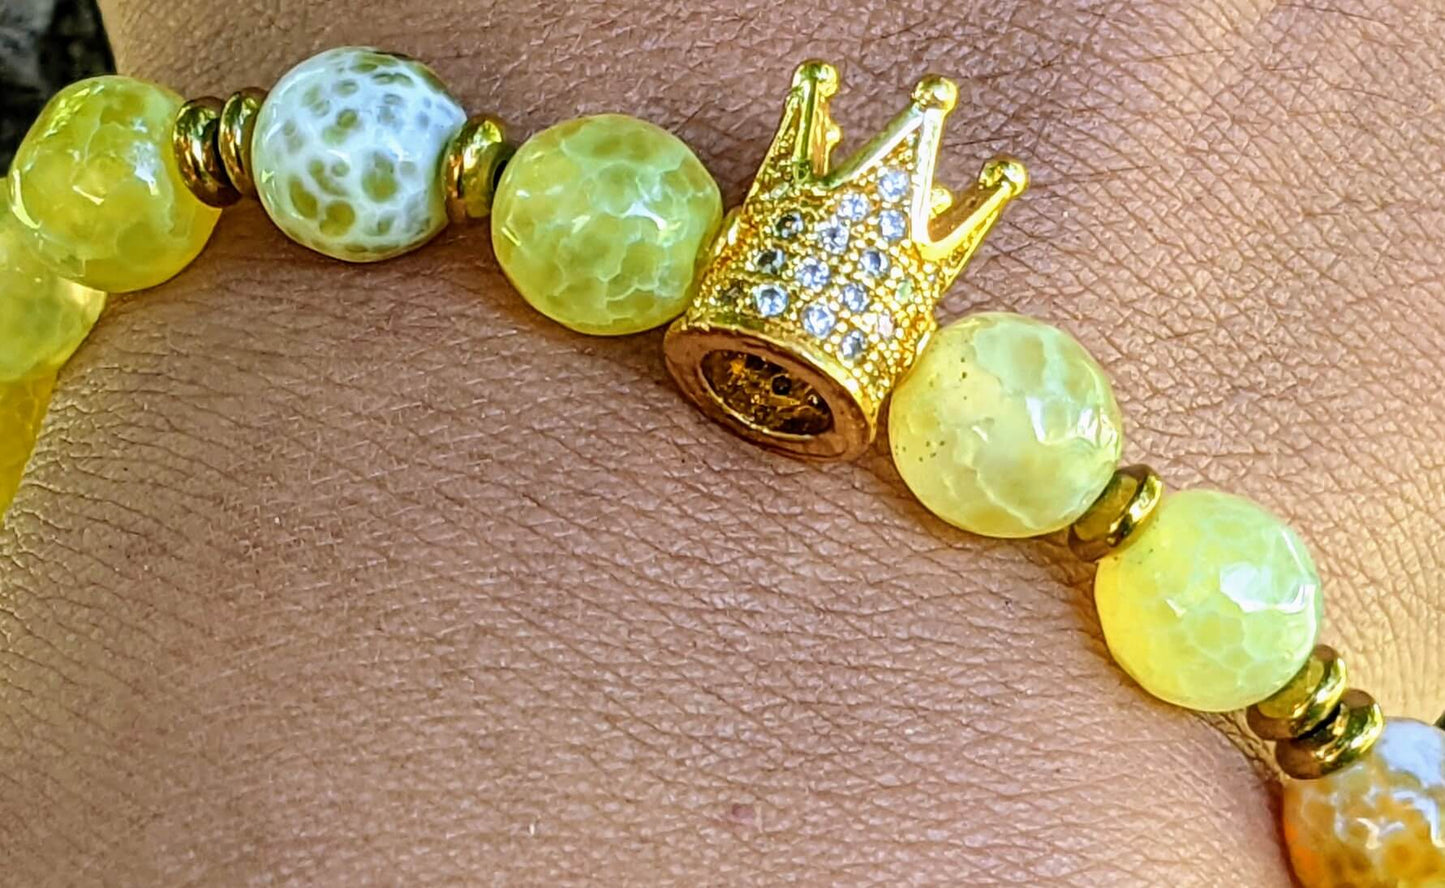 Gold Crown with Yellow Agate and Hematite Spacers